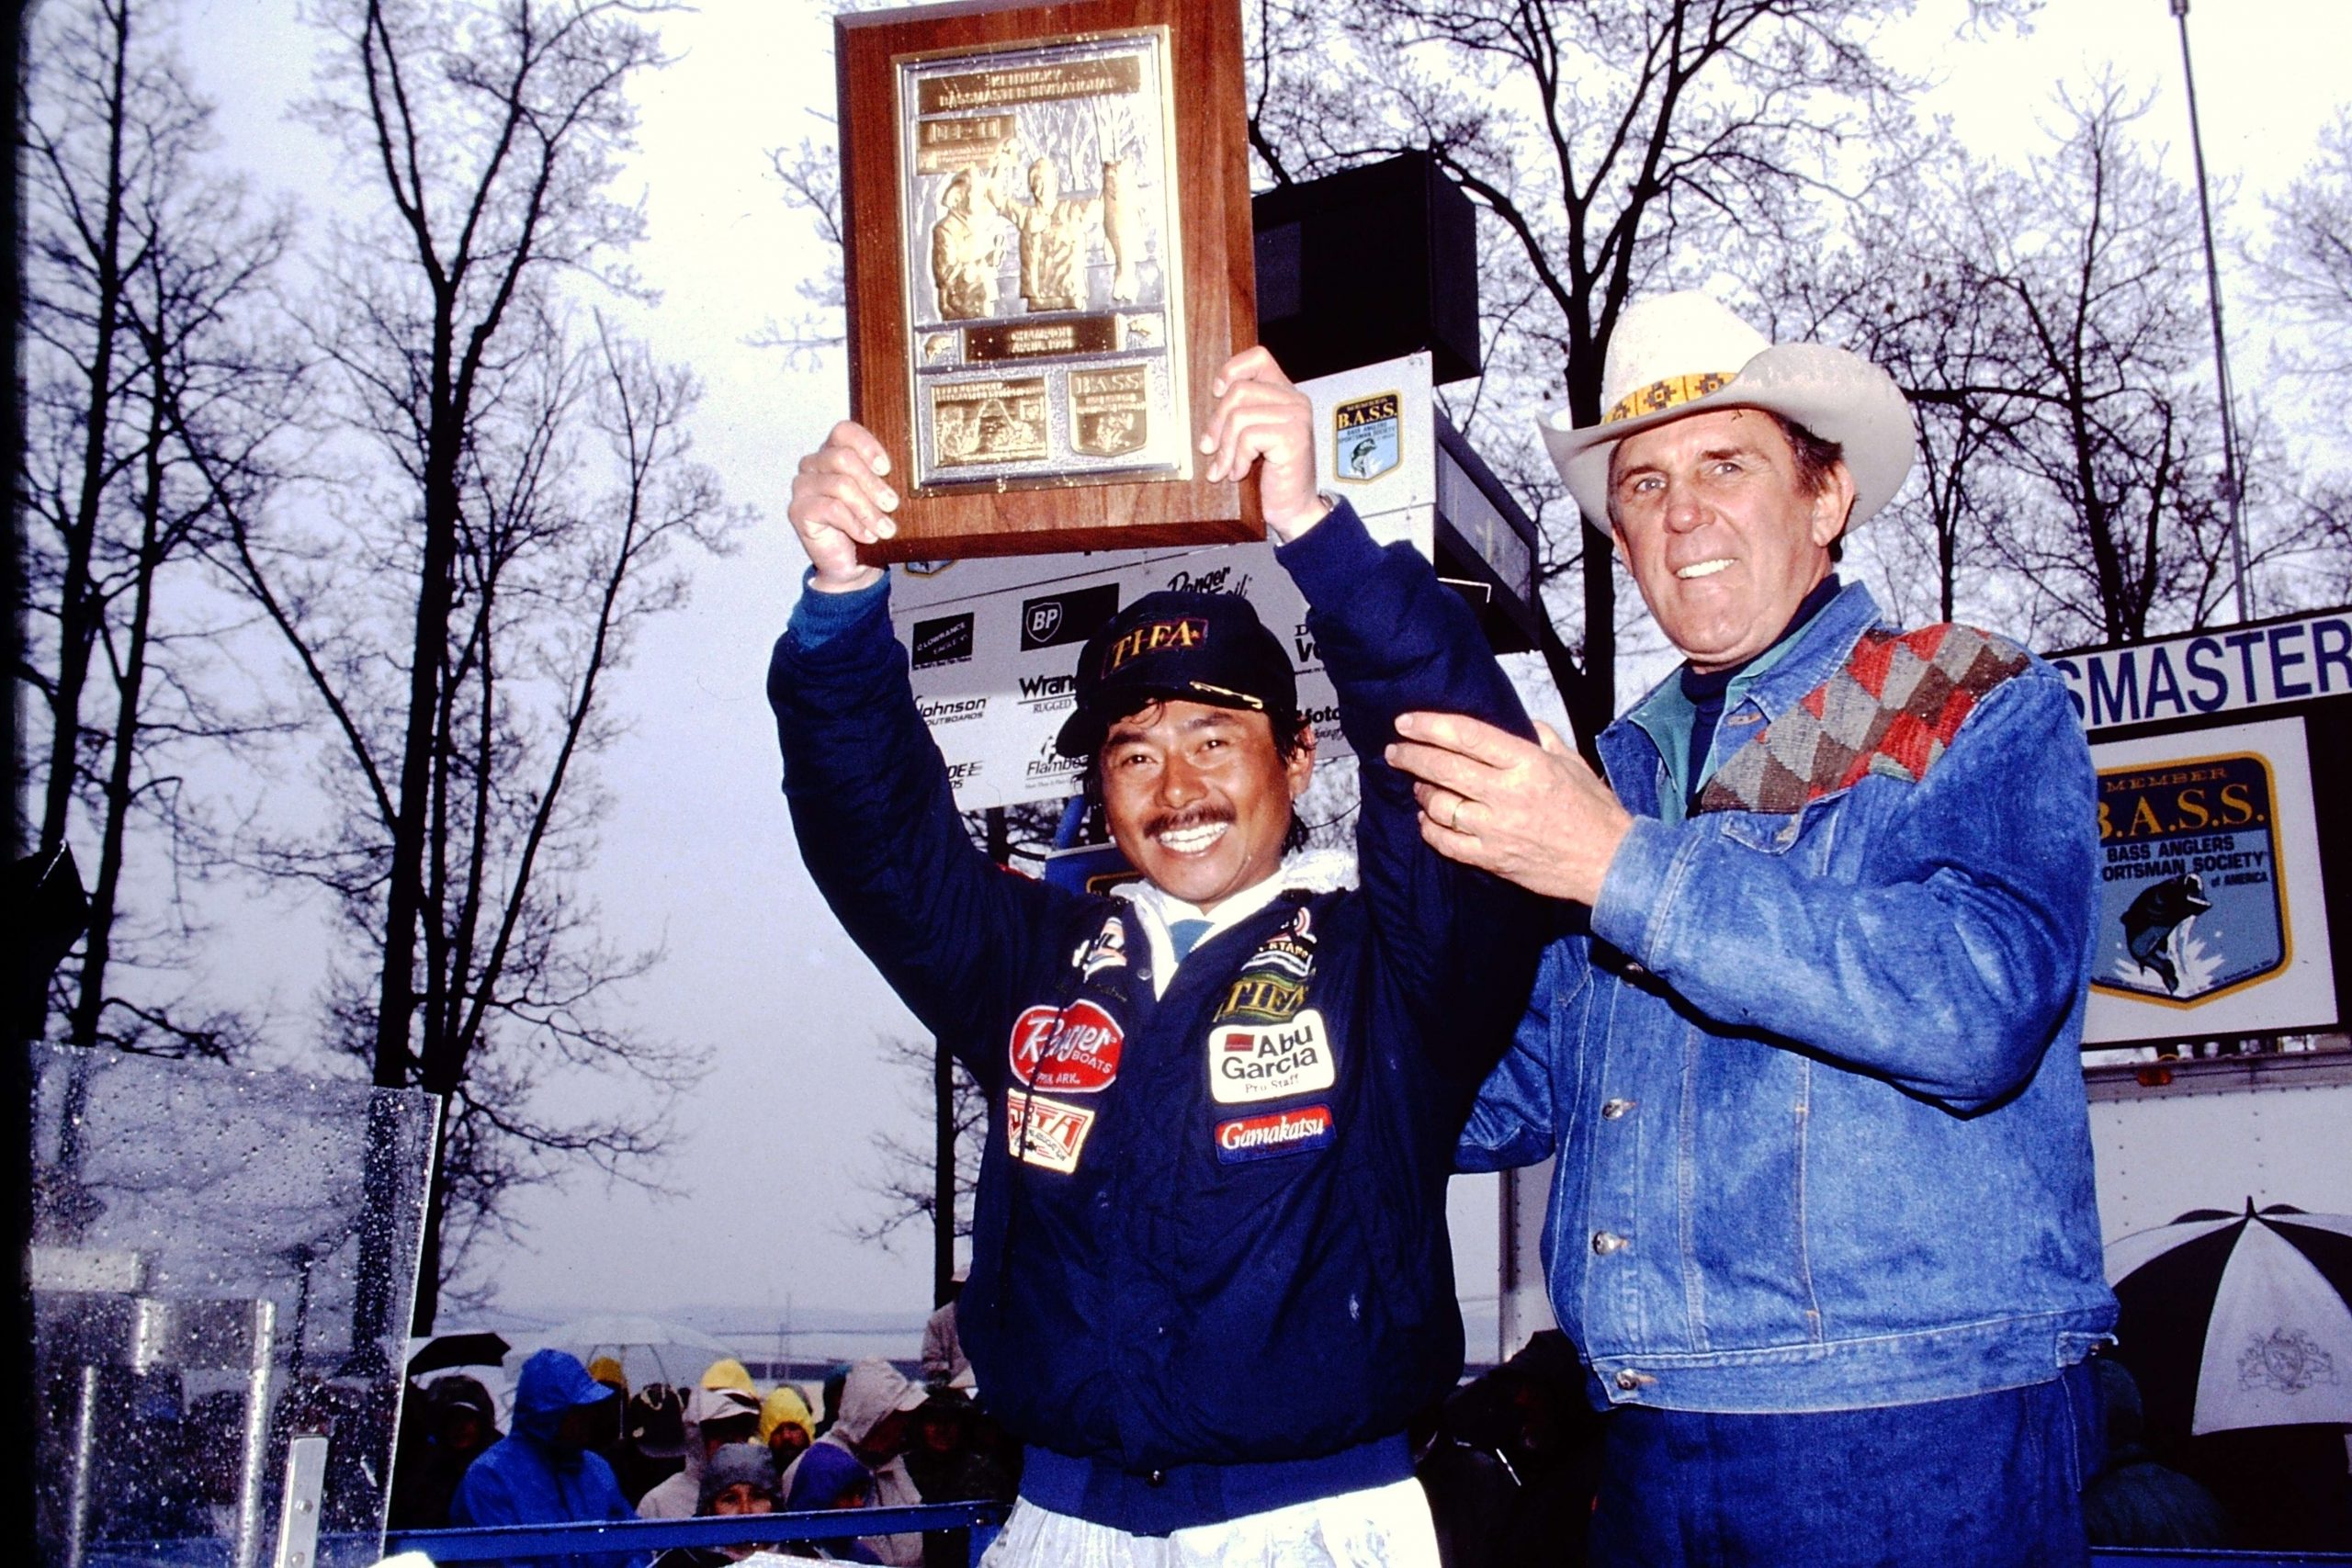 <p><strong><u>First international B.A.S.S. winner</u></strong></p>
<p>Norio Tanabe, a native of Tokyo, Japan, was the first international angler to win a Bassmaster event. He'd been competing off and on since 1990, and he got his victory in April 1993 on Kentucky Lake. Tanabe went on to compete for several more years. He didn't win again, but he set the stage for other international anglers, such as Takahiro Omori and Morizo Shimizu, to take home trophies.</p>
